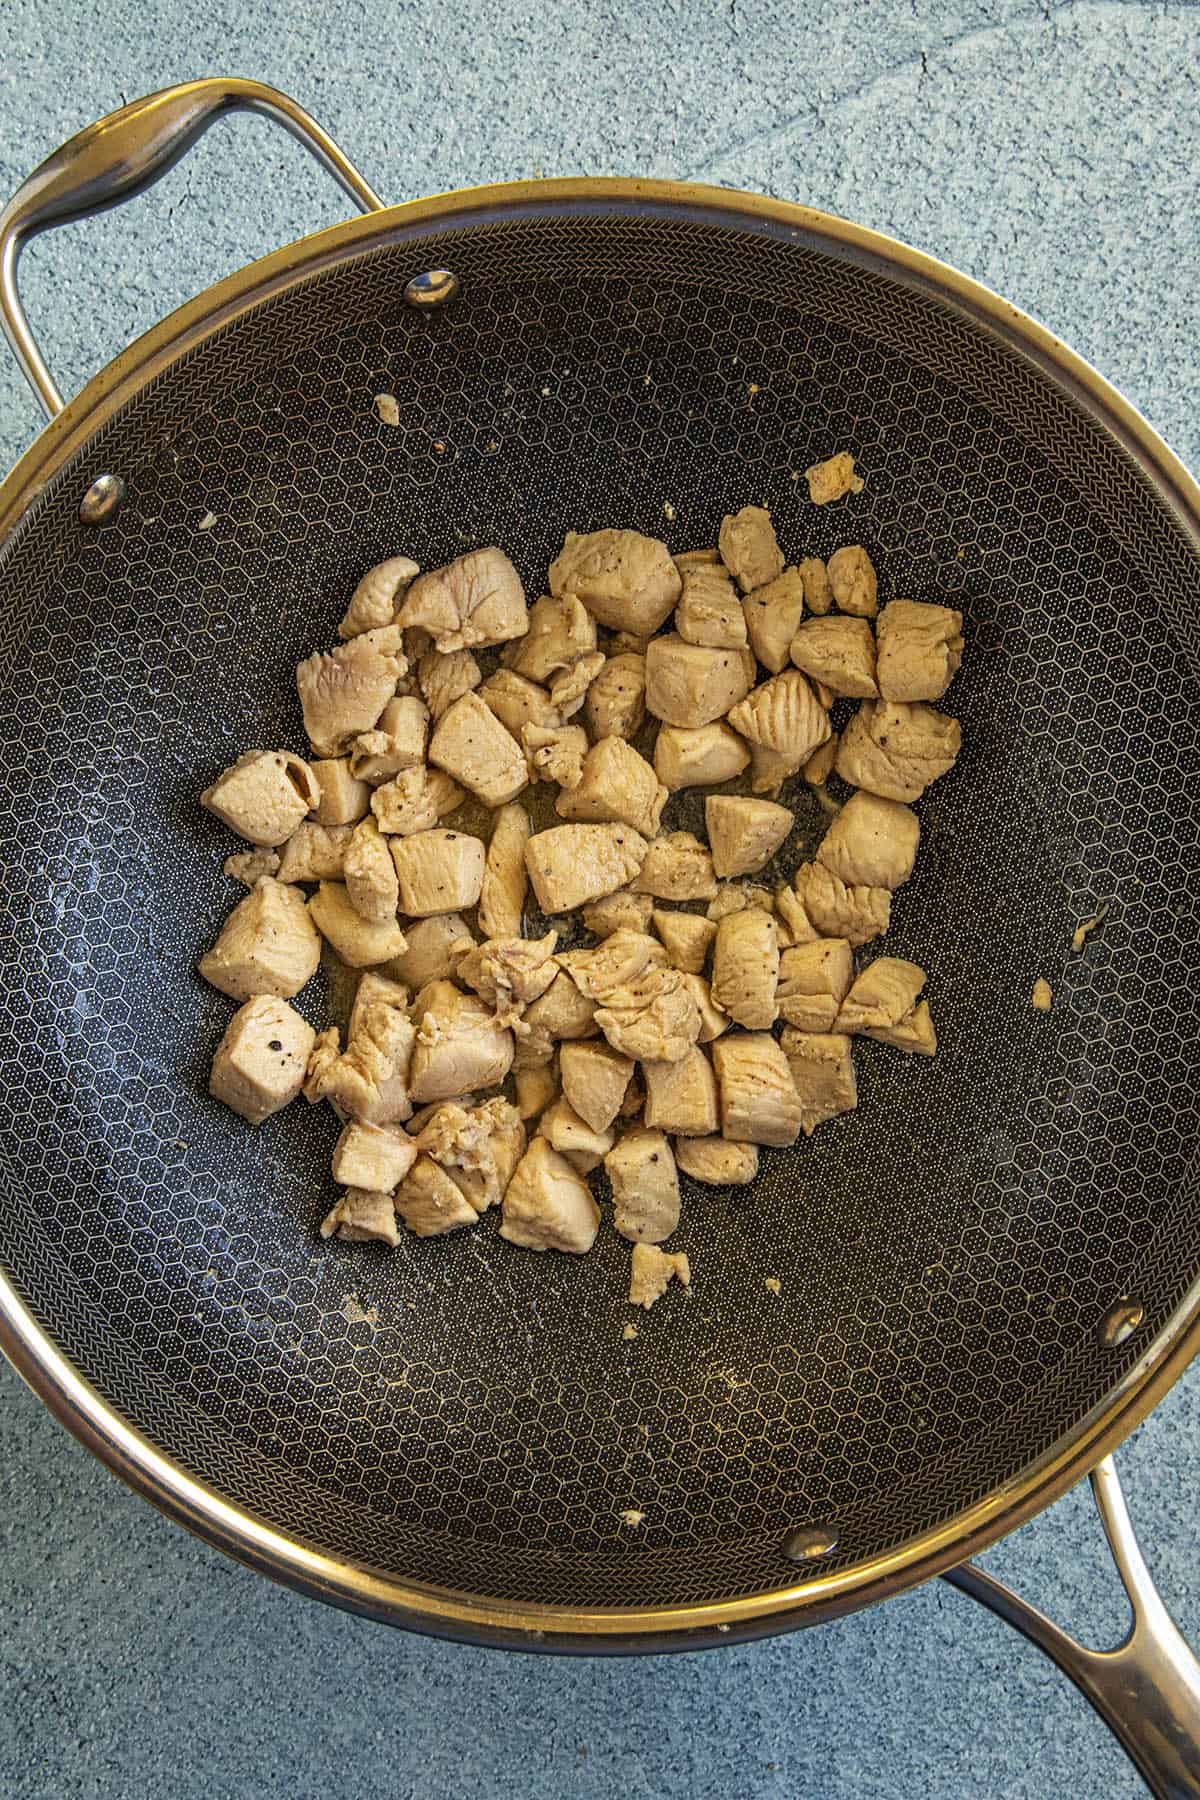 Stir frying the chicken in a hot pan to make Chicken Lo Mein